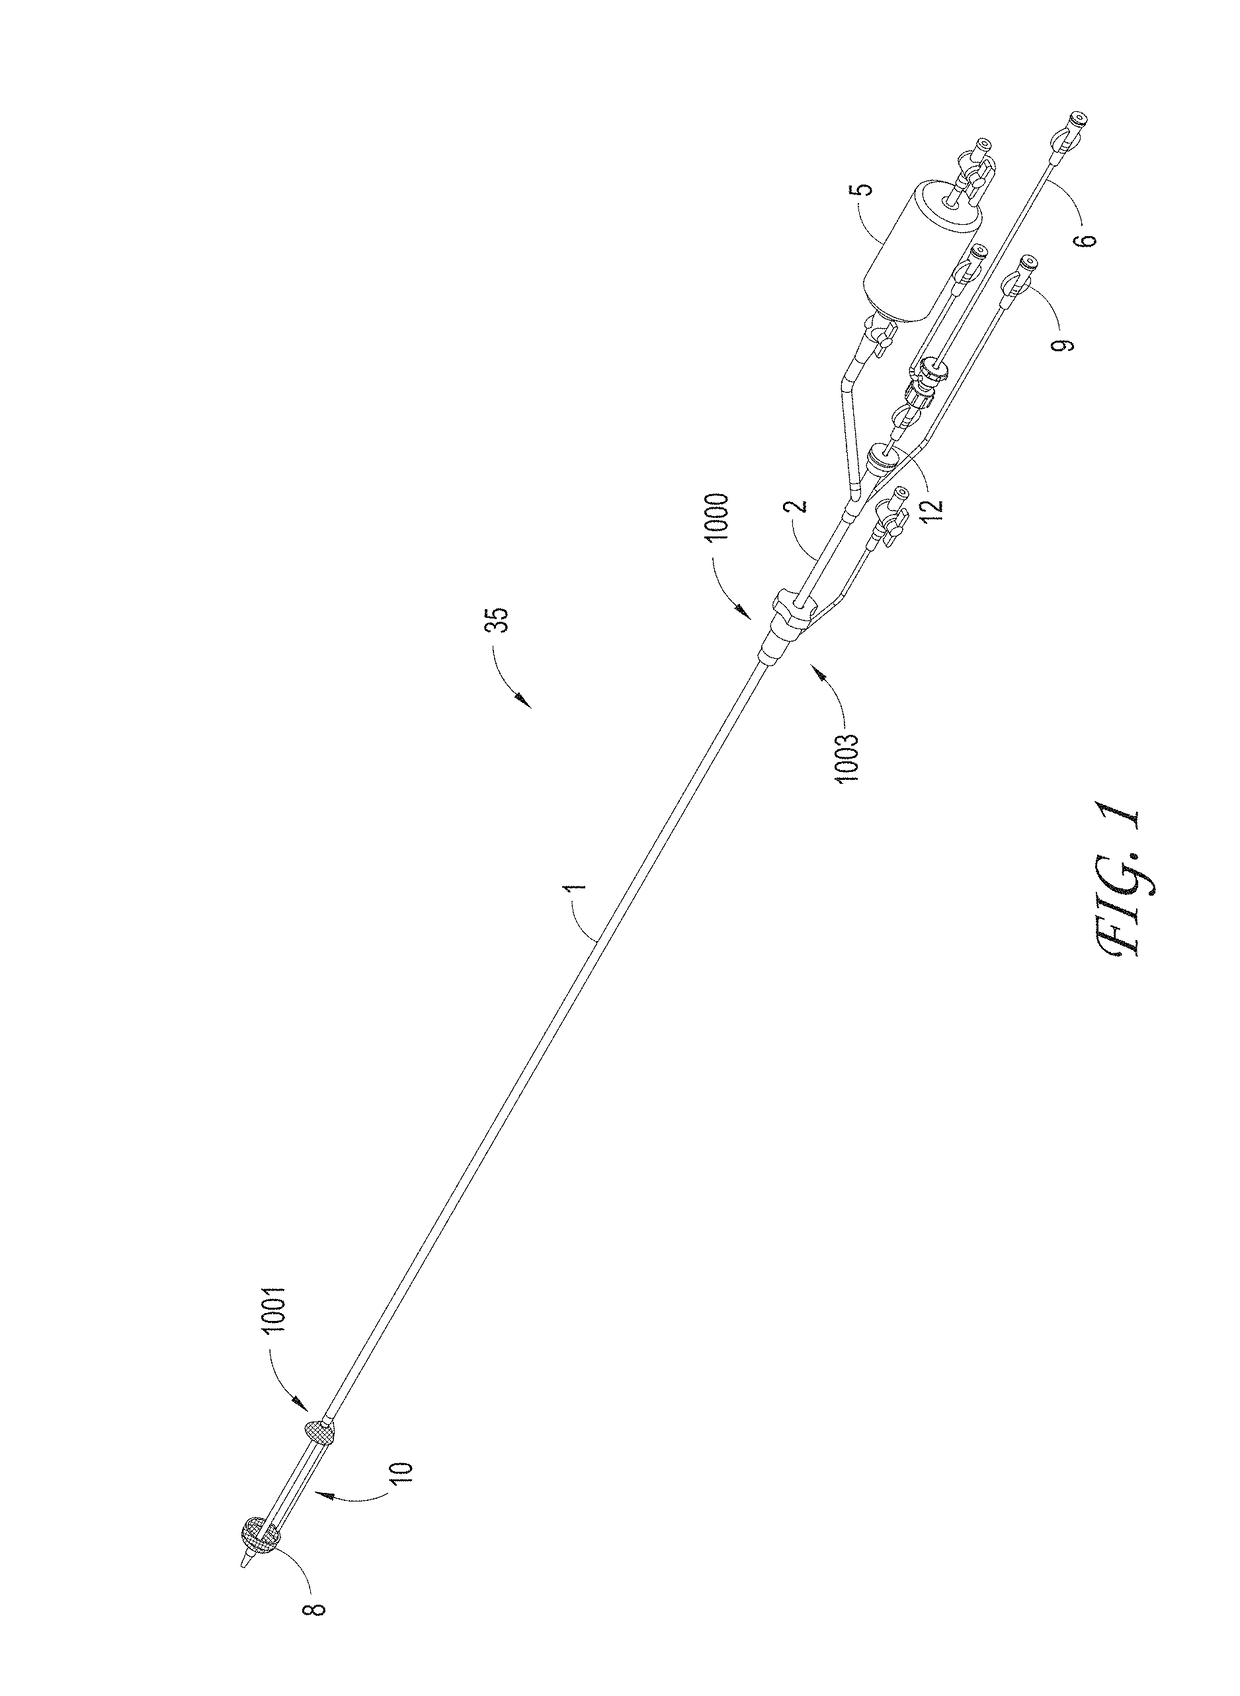 Axial lengthening thrombus capture system